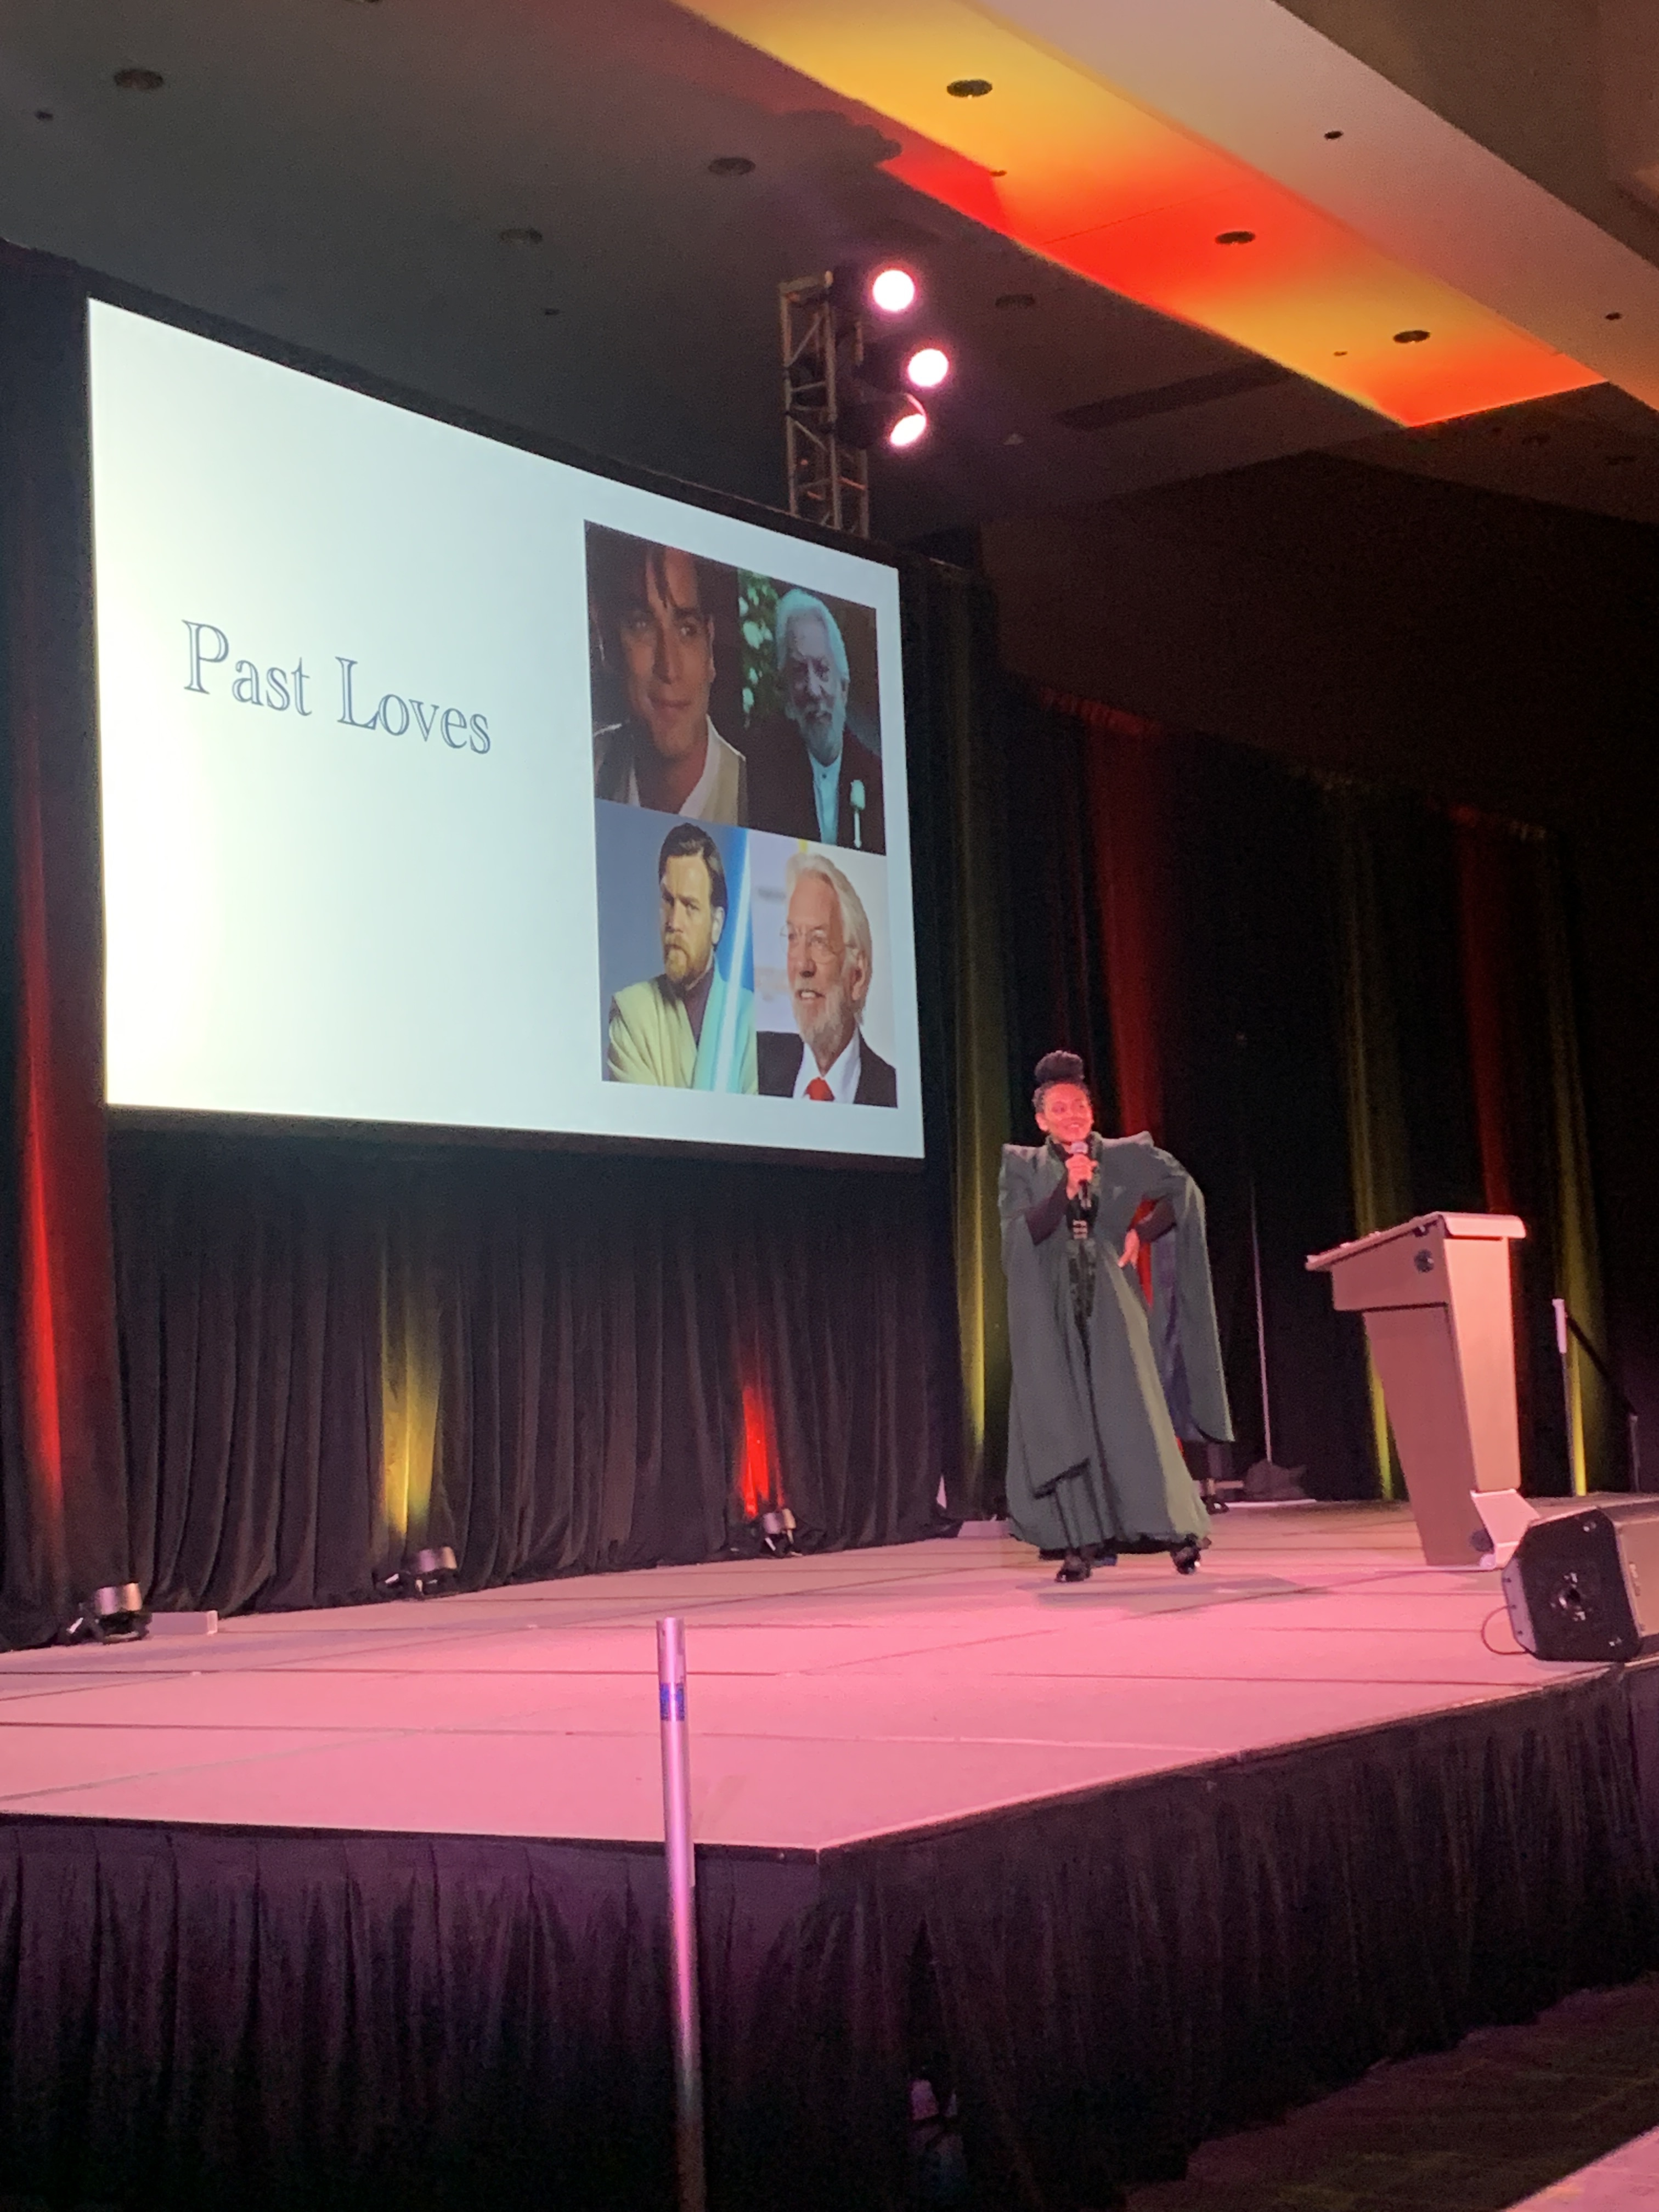 Chanel Williams dressed as Minerva McGonnagall on stage for her LeakCon Panel in front of a powerpoint slide that says past loves with photos Ewan McGregor and President Snow from the Hunger Games movies.